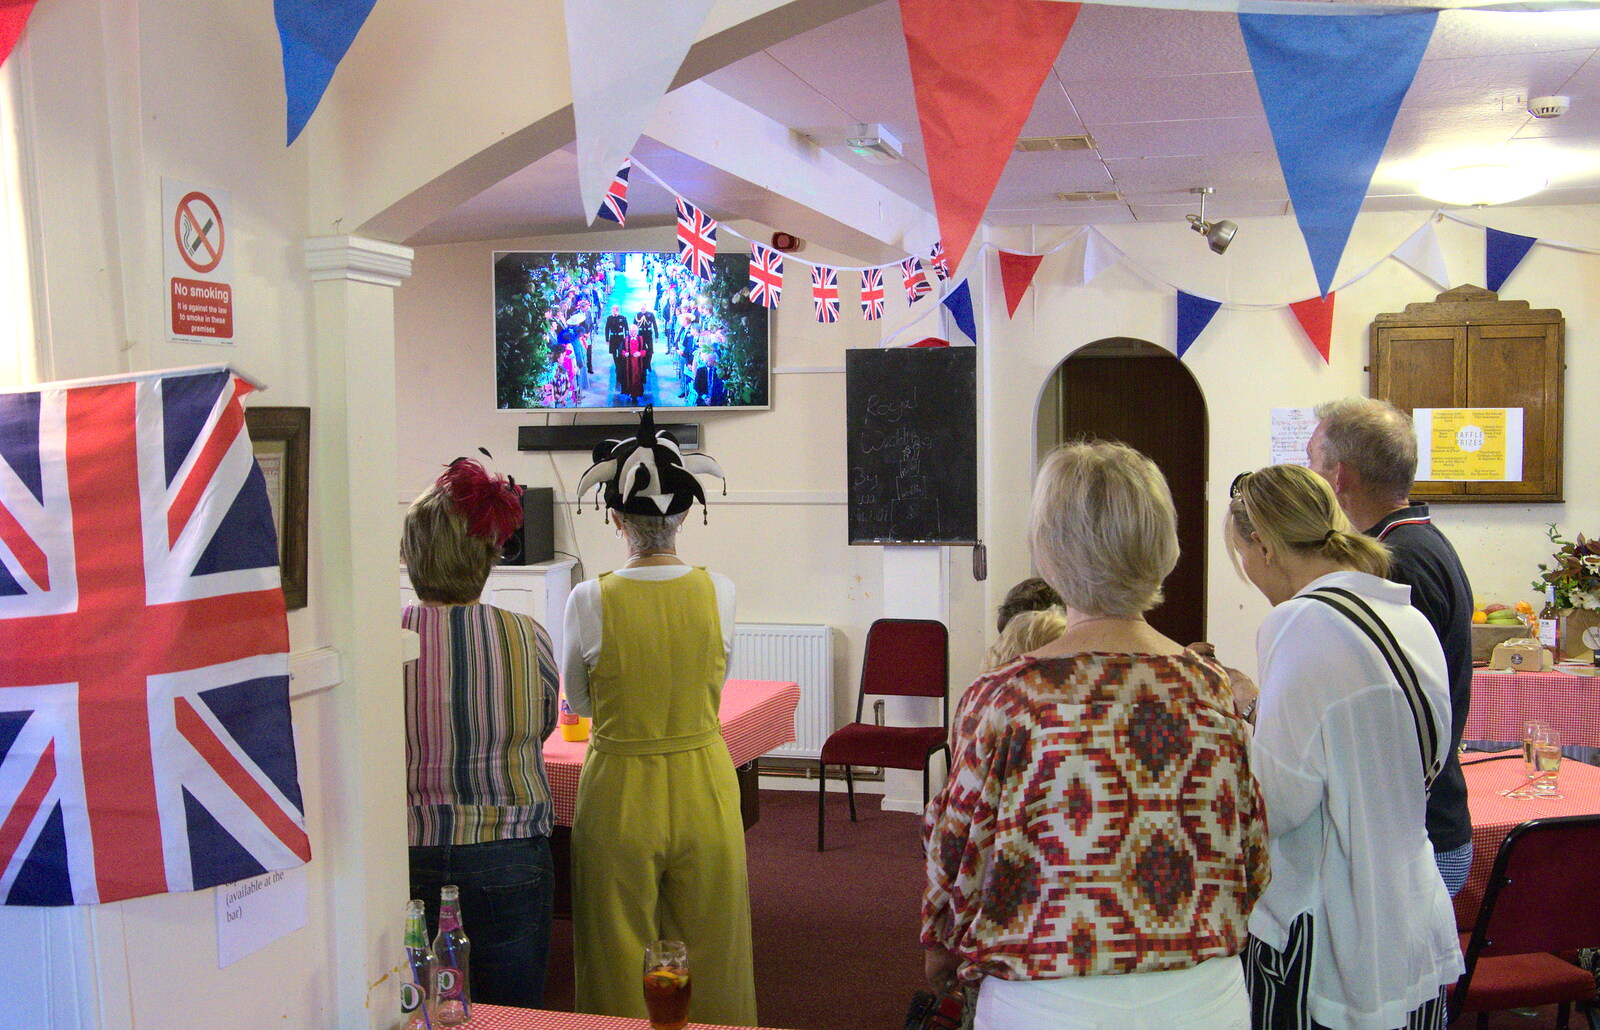 The royal wedding occurs on TV from A Right Royal Wedding at the Village Hall, Brome, Suffolk - 19th May 2018